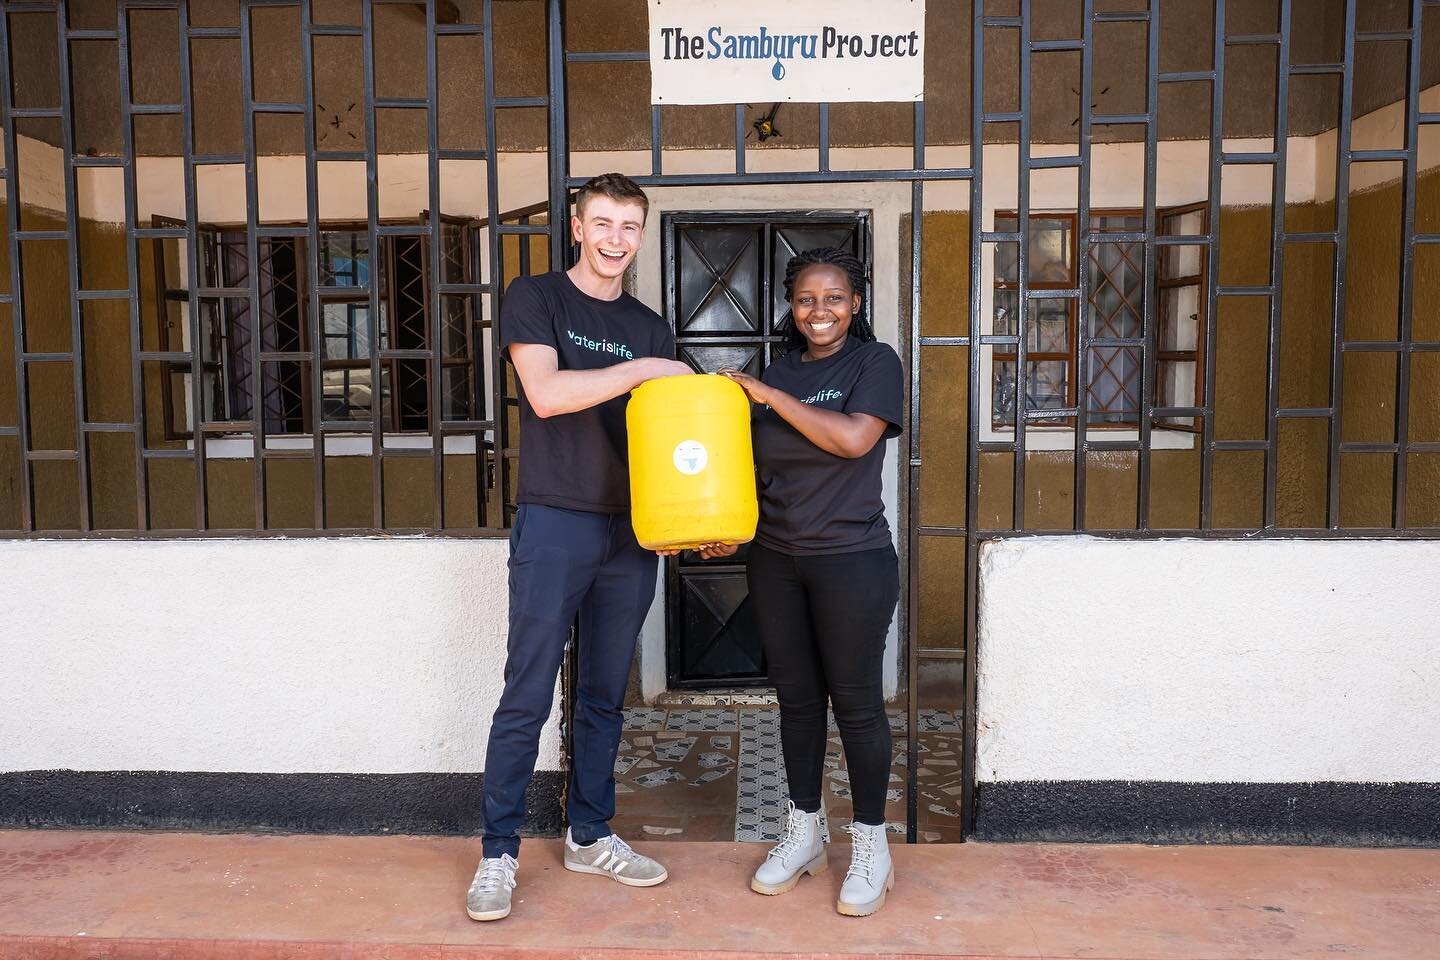 This summer, intern and University of Michigan freshman Eli Pollak (@elispollak), bought a plane ticket, packed his suitcase, and hopped on a plane to spend three weeks with our team in Samburu. During his time there, Eli worked in office administrat